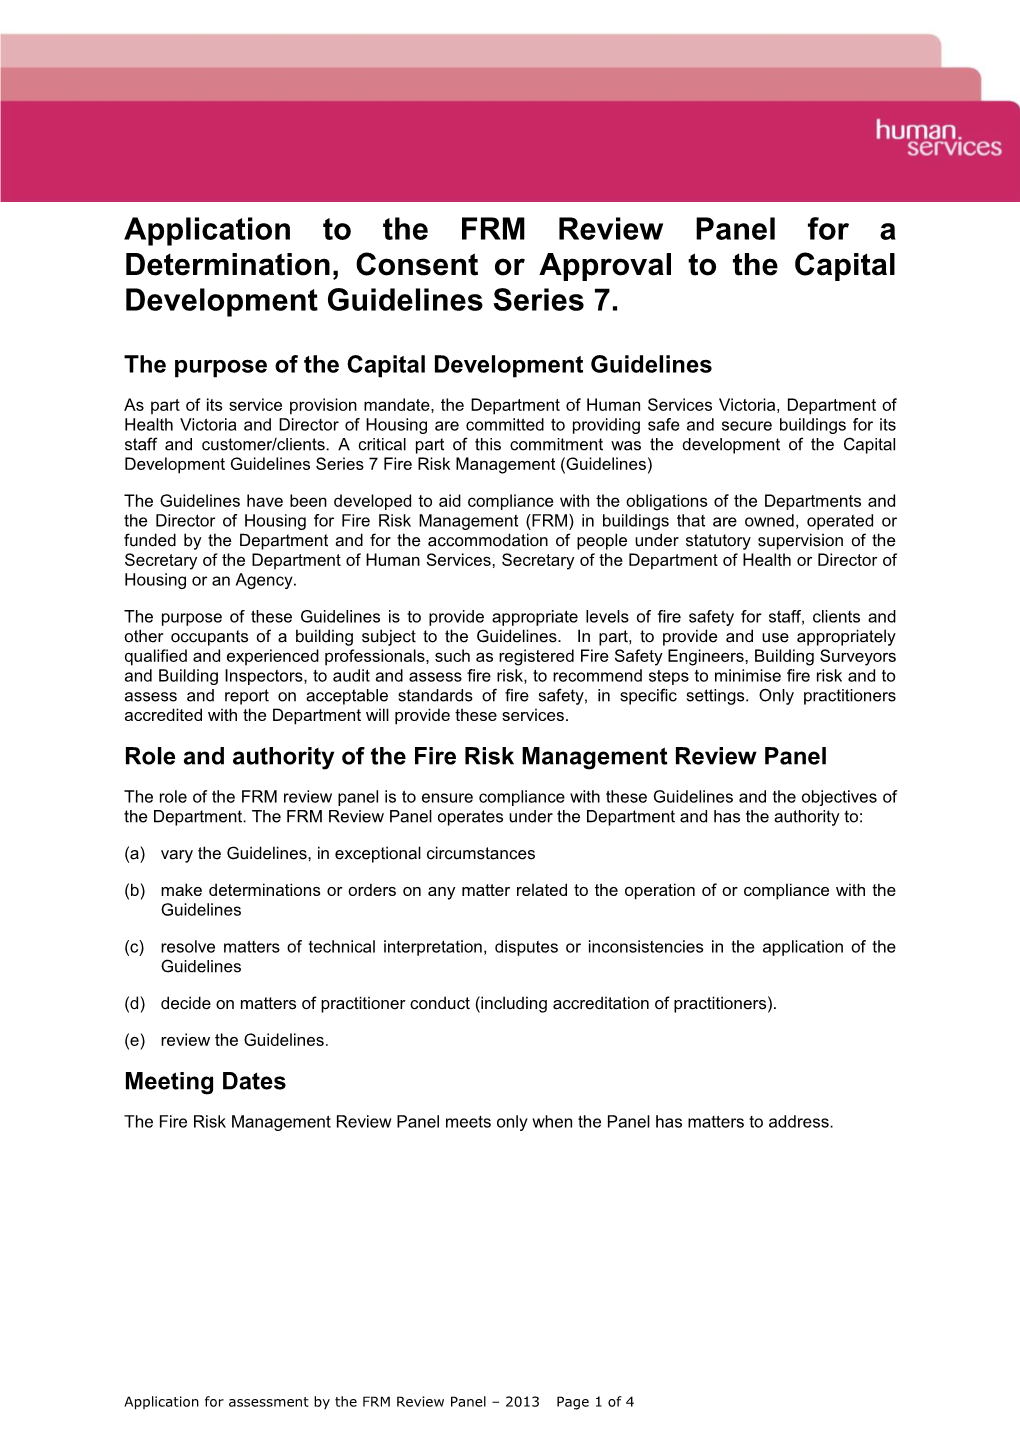 The Purpose of the Capital Development Guidelines